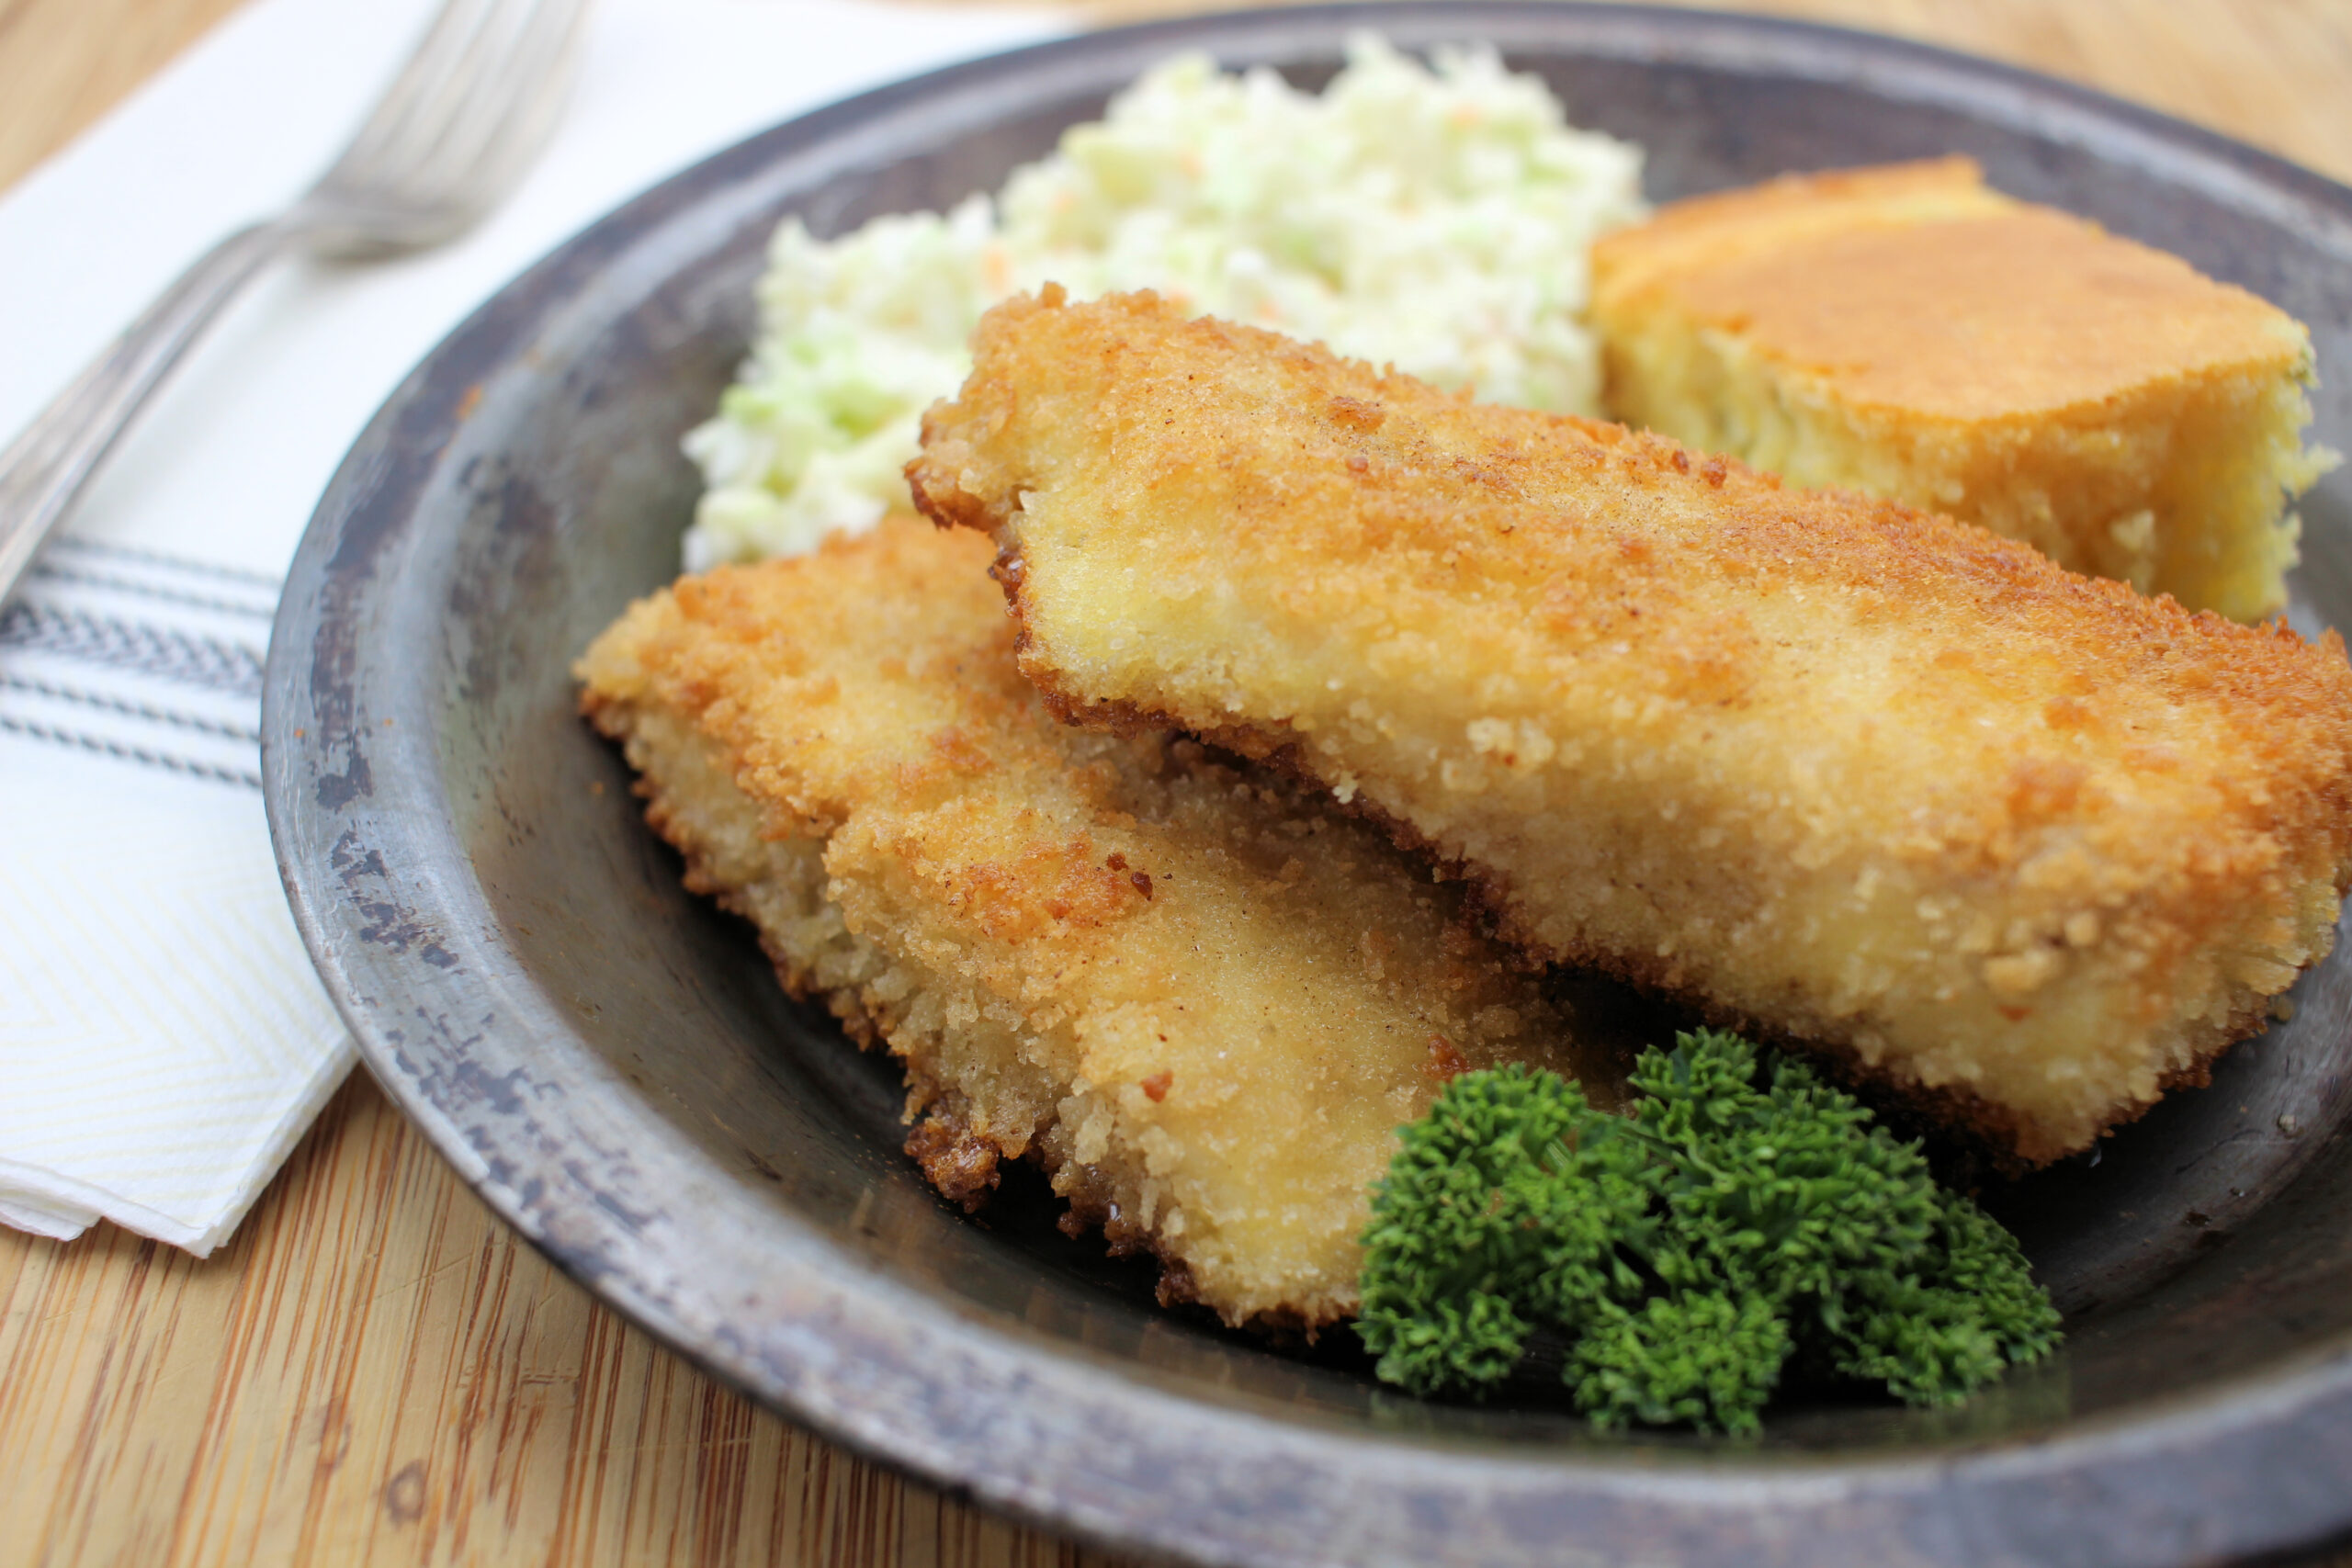 Fried Striped Bass with Parmesan. Credit: Vanda Lewis.